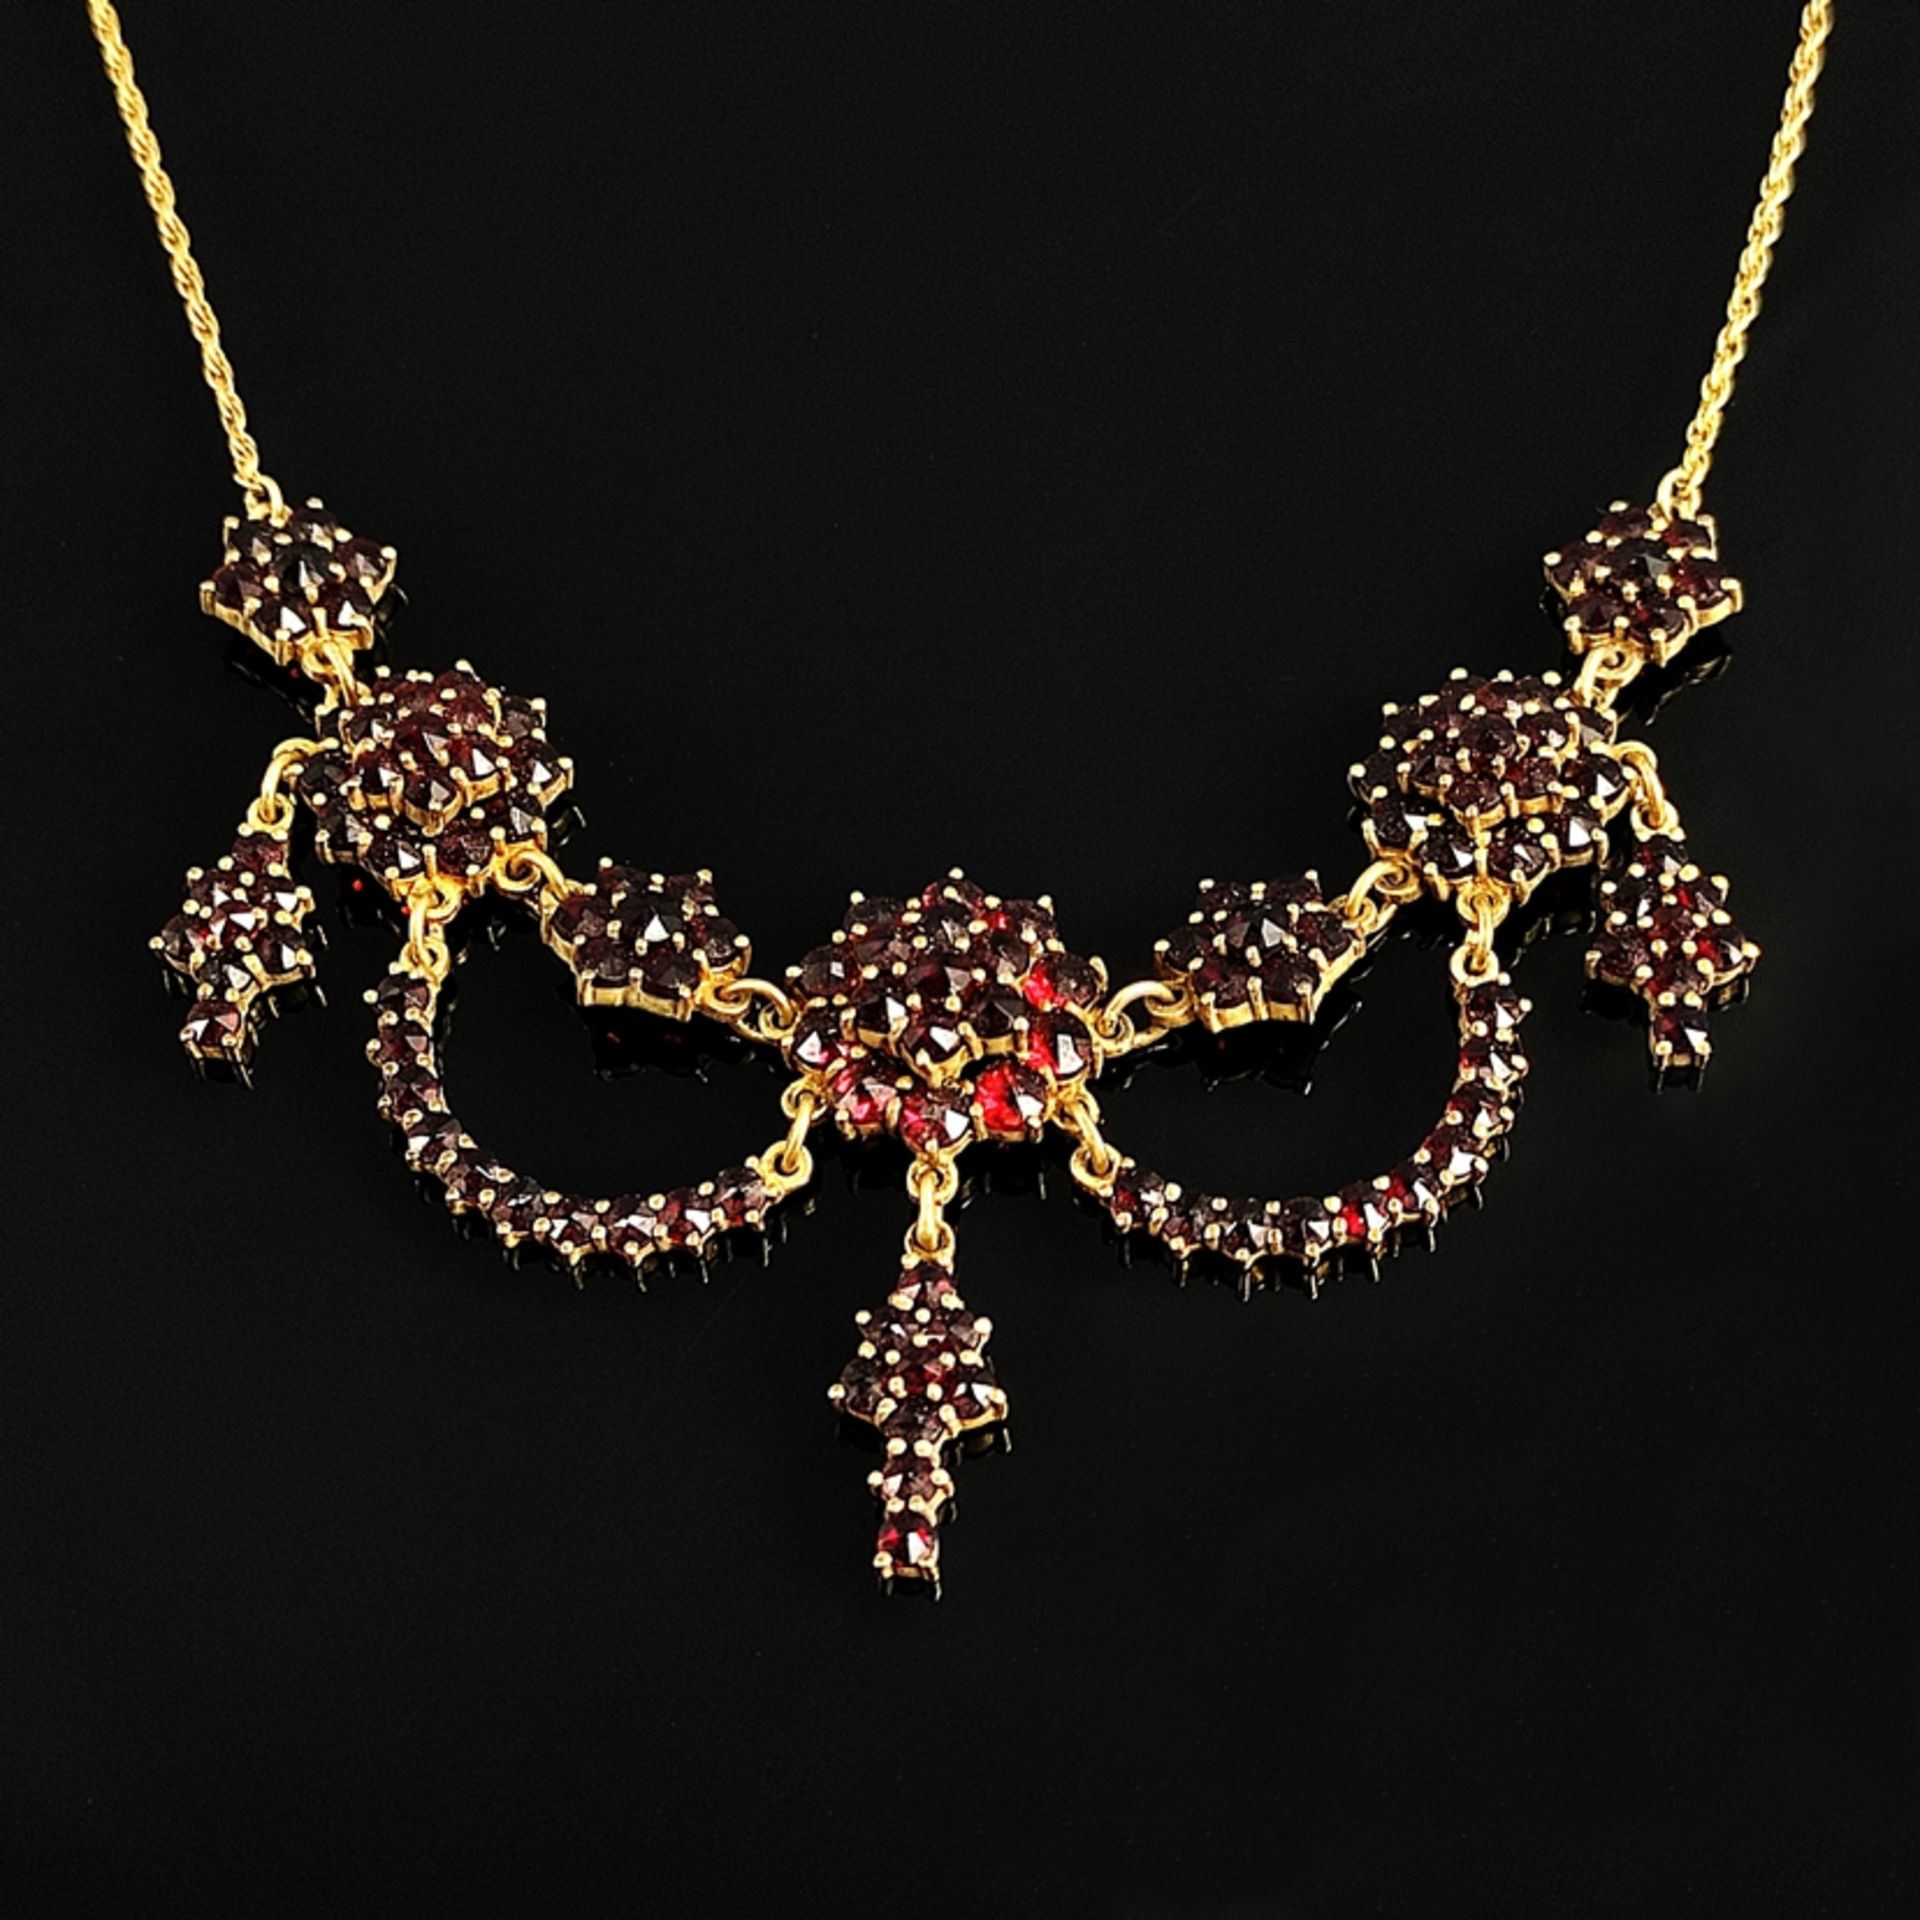 Antique garnet necklace, silver 800 in 585/14K yellow gold-gilt, 17,6g, elaborately designed middle